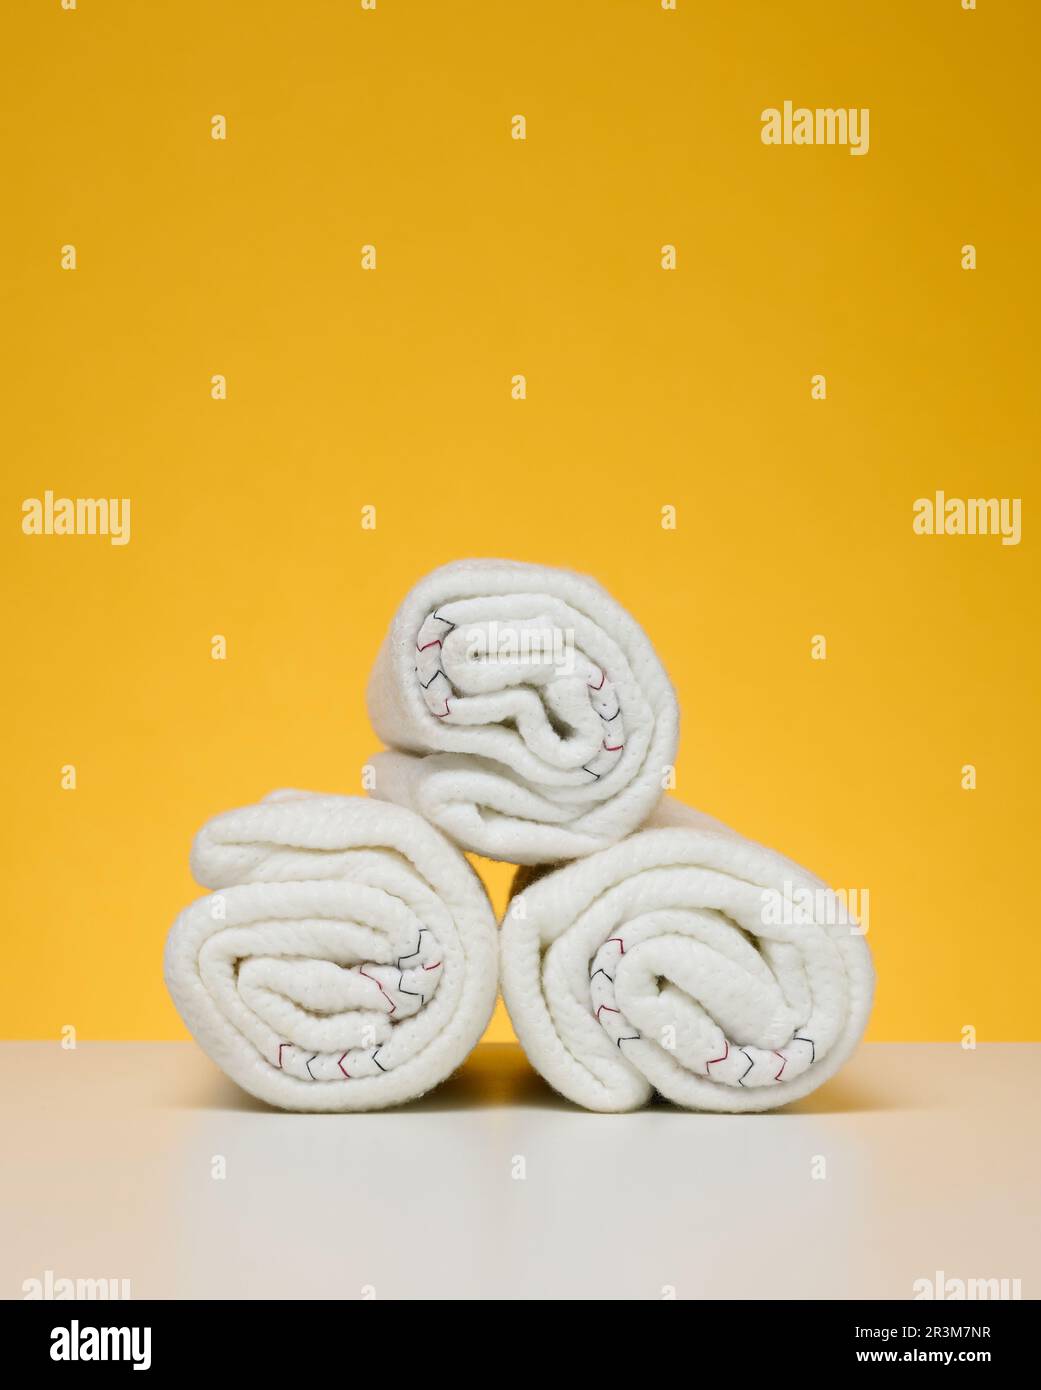 Twisted white rags for mopping on a yellow background Stock Photo